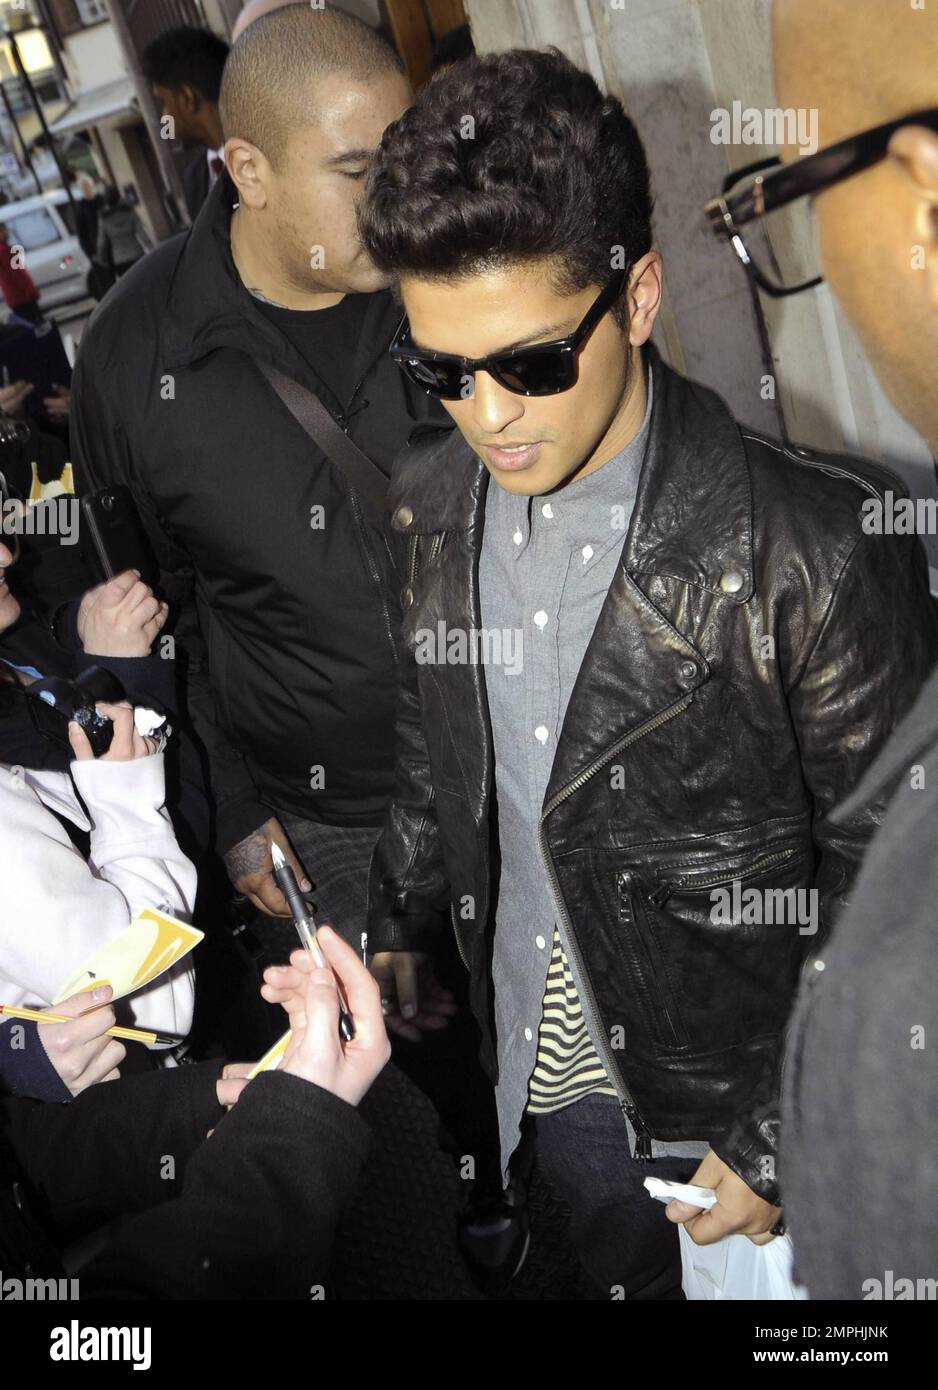 Singer/songwriter Bruno Mars (aka Peter Gene Hernandez) is mobbed by fans  and photographers as he leaves BBC Radio 1 after an appearance. Best known  for co-writing and vocals on "Nothin' on You"